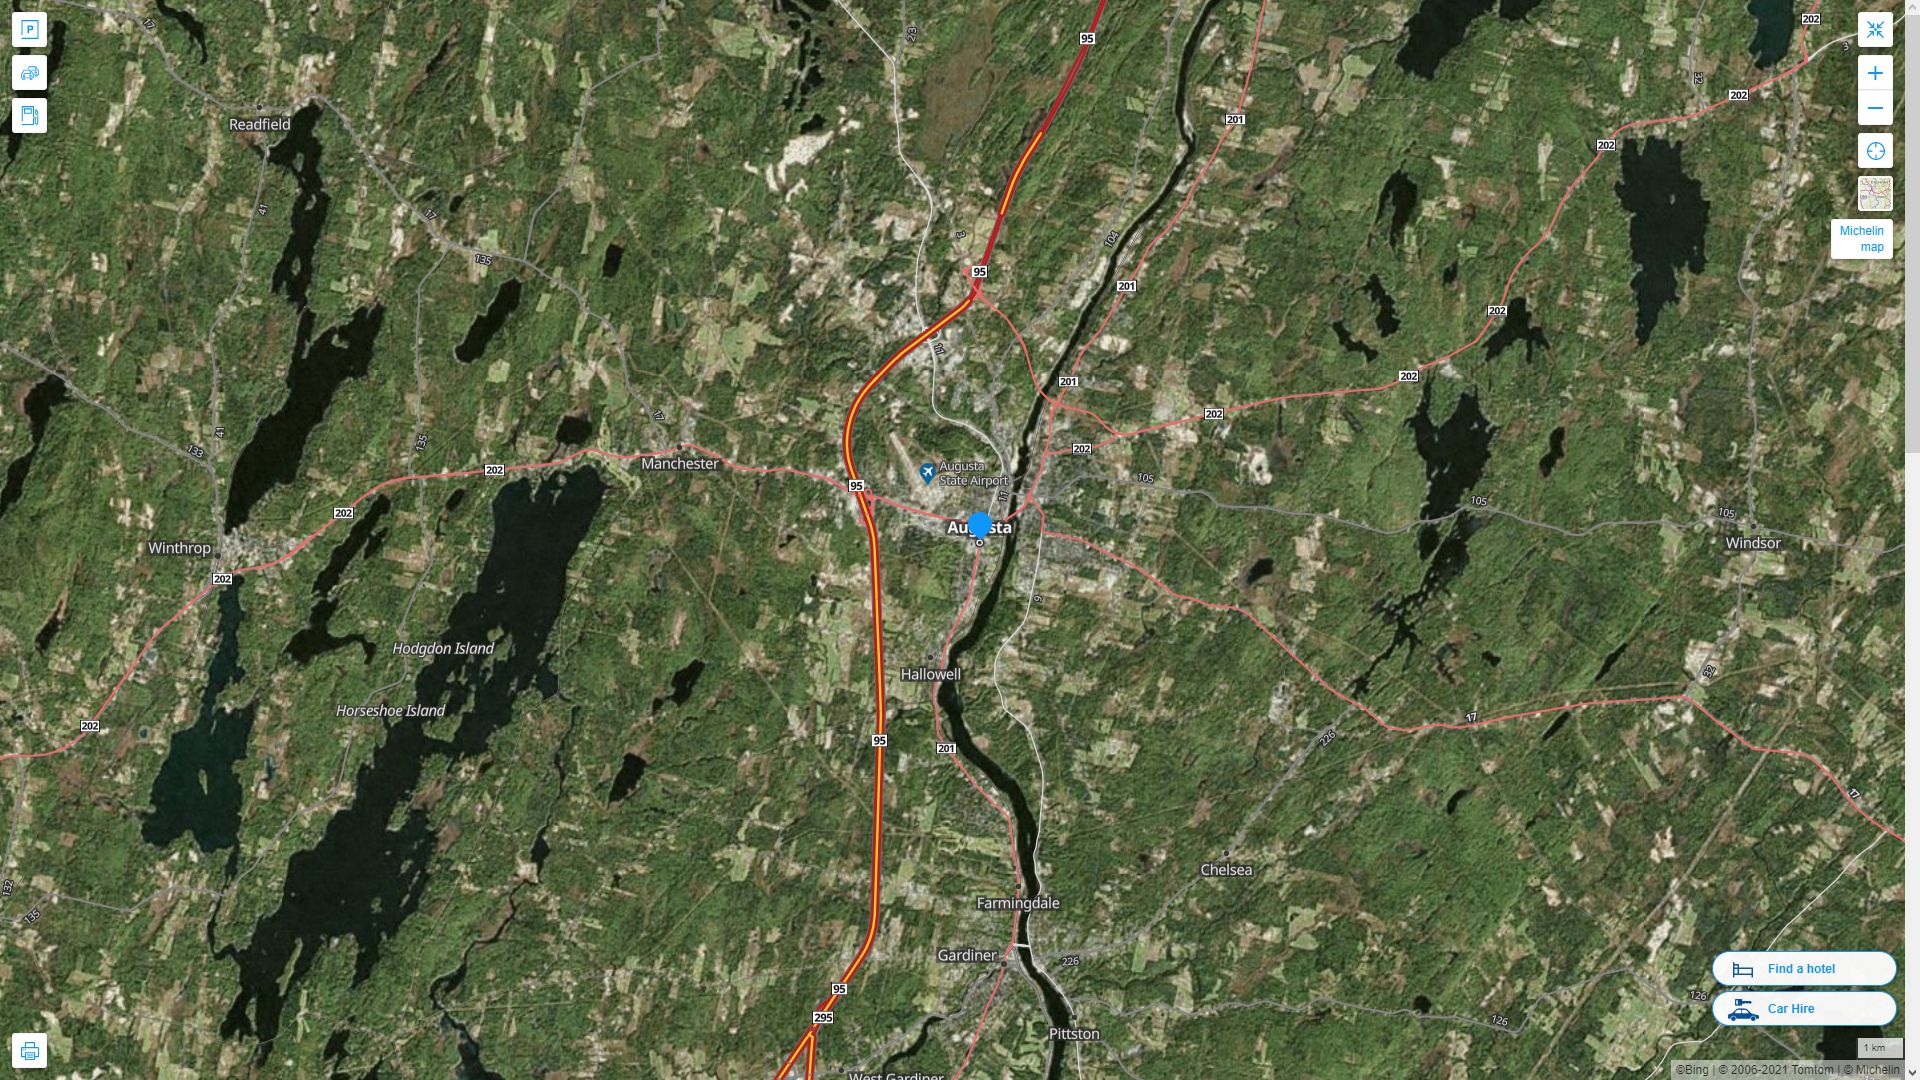 Augusta Maine Highway and Road Map with Satellite View